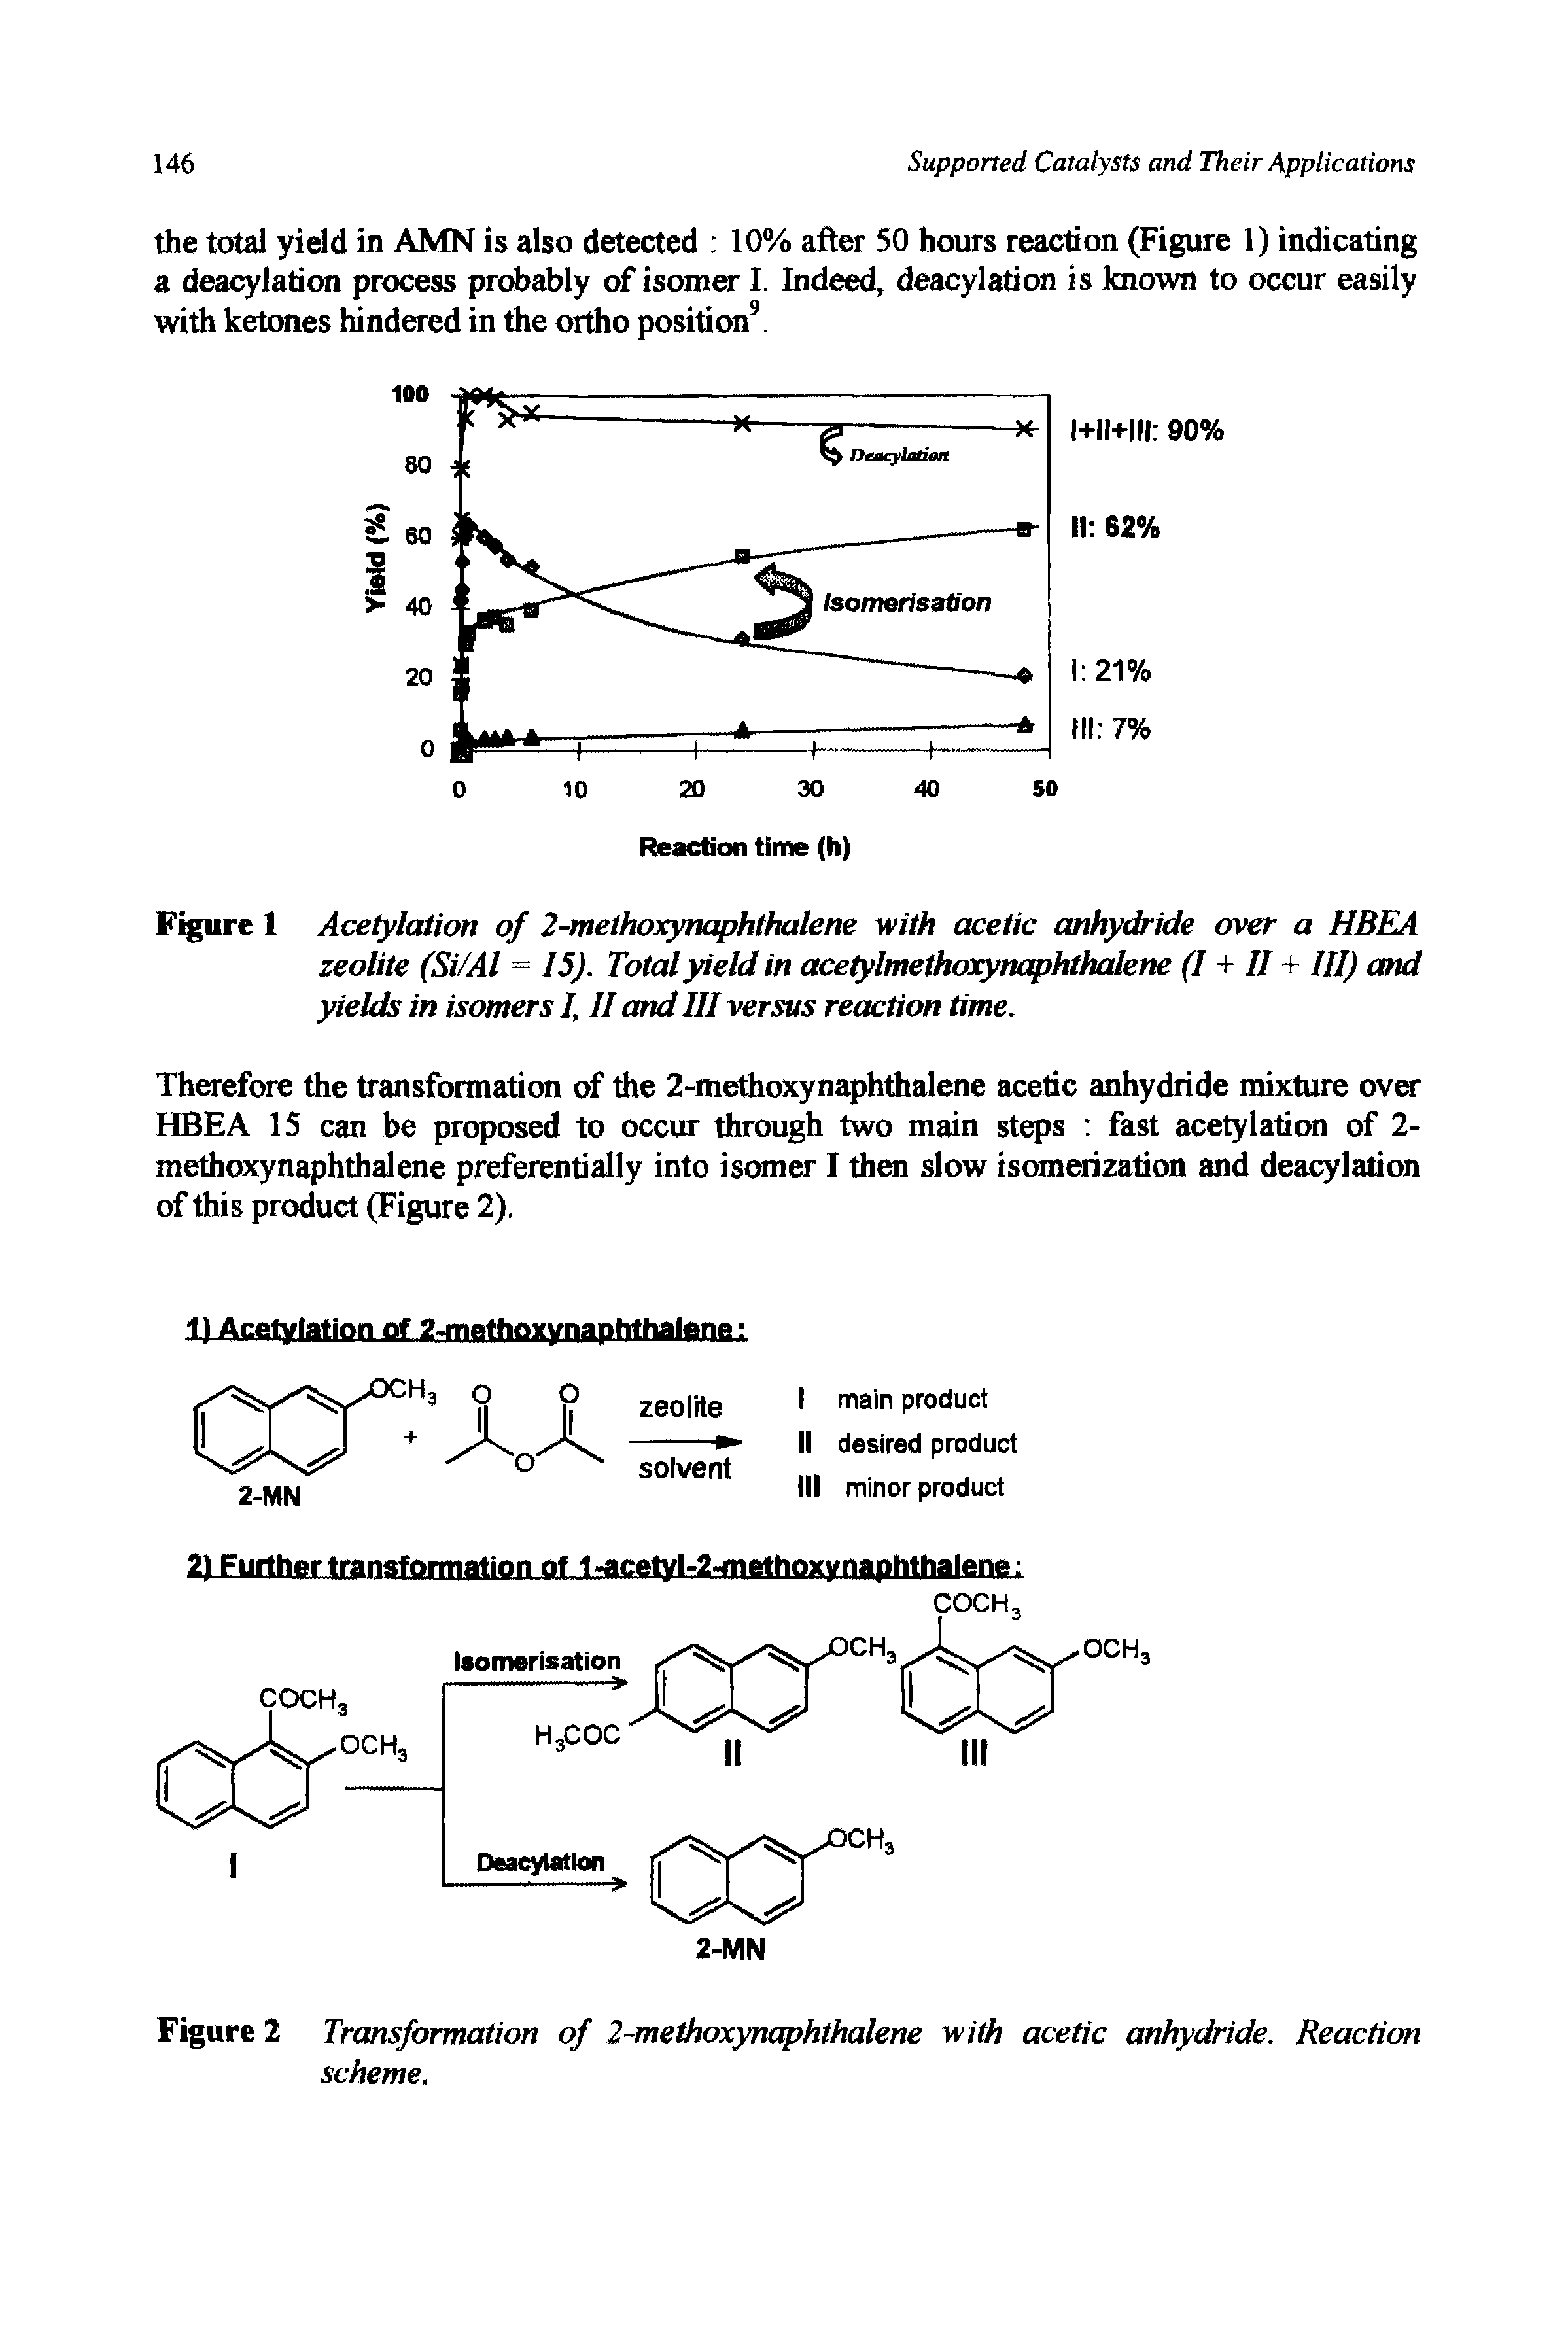 Figure 1 Acetylation of 2-methoxynaphthalene with acetic anhydride over a HBEA zeolite (Si/Al = 15). Total yield in acetylmethoxynaphthalene (I + II + III) and yields in isomers 1 II and III versus reaction time,...